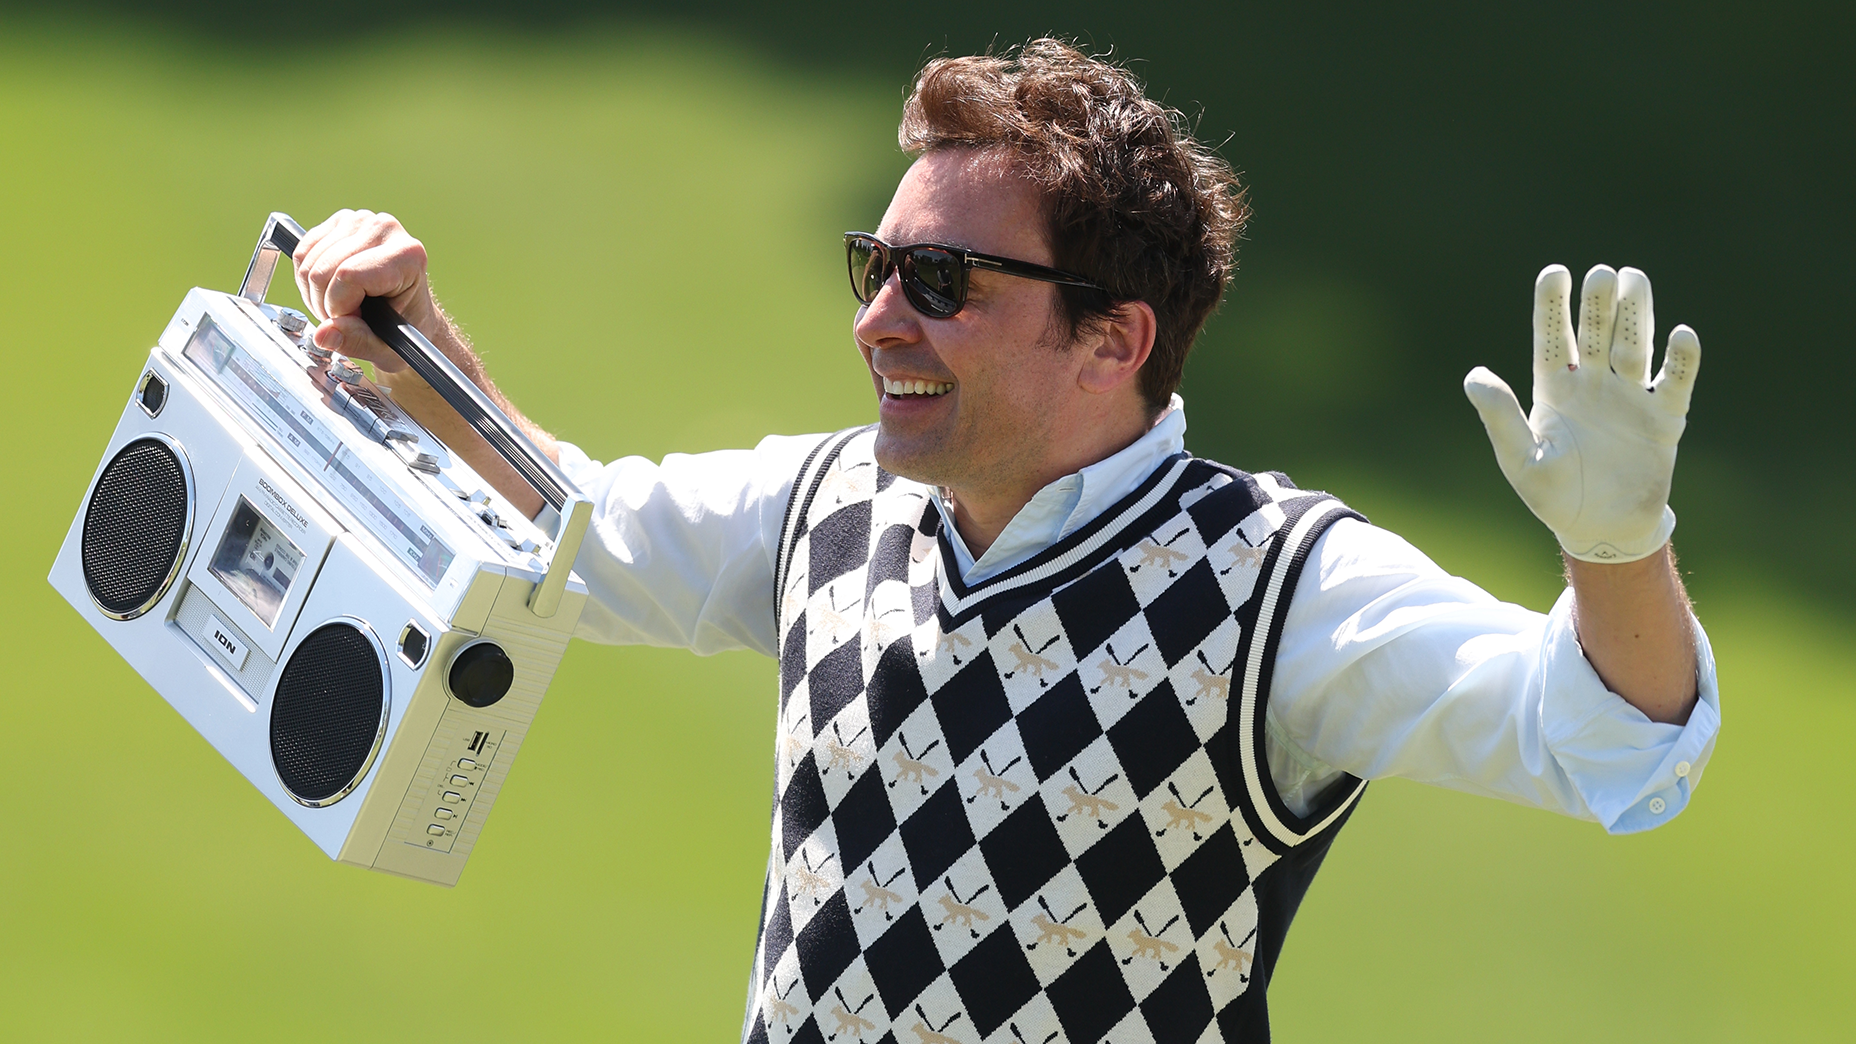 Jimmy Fallon brough the noise, in more ways than one, to the 8 am Invitational.